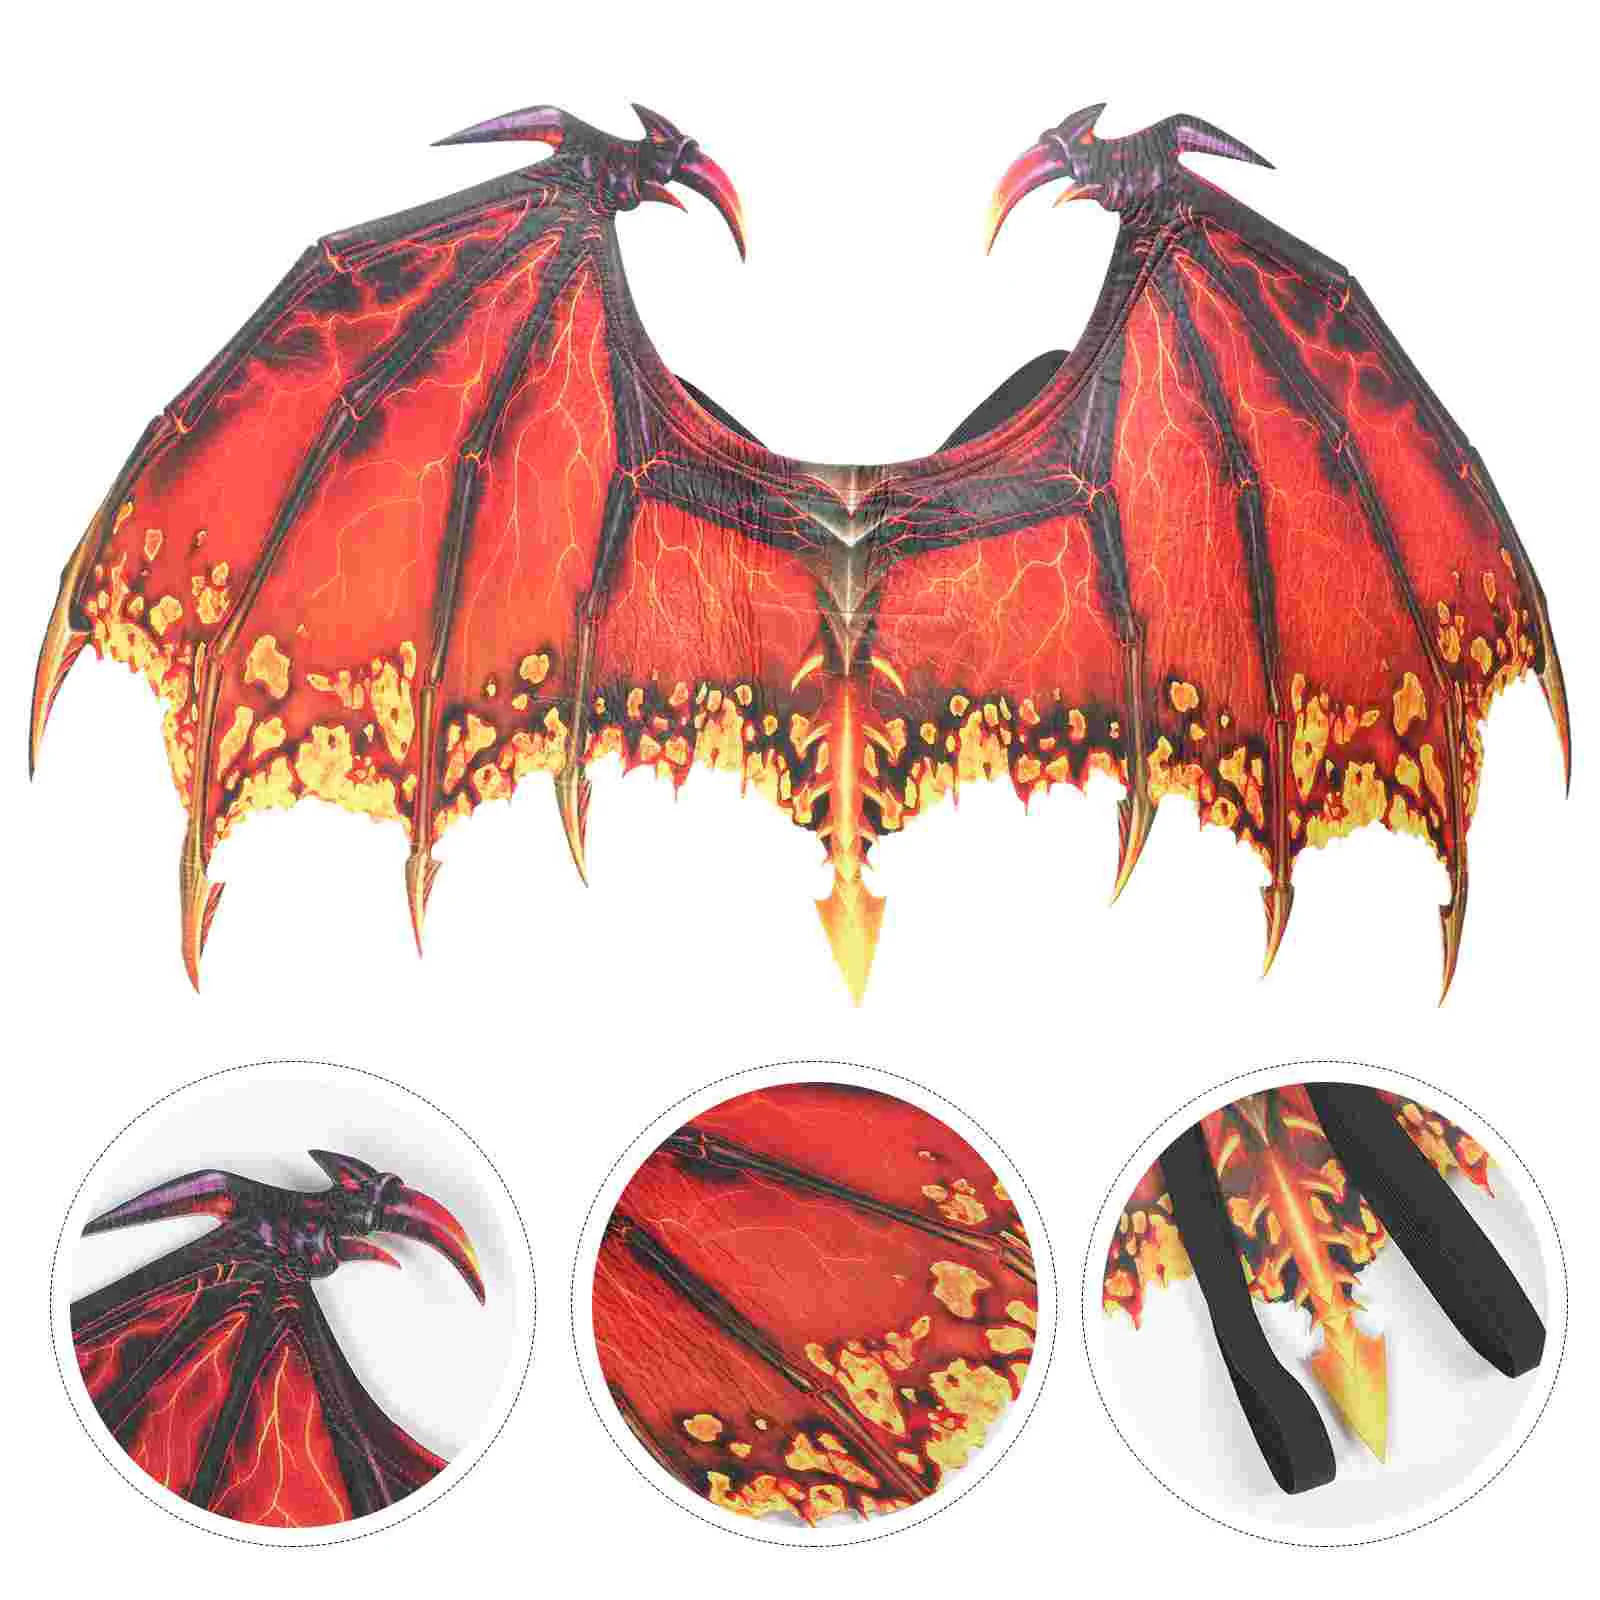 

Accessories Child Fancy Dress Adults Halloween Costume Creative Flying Wings Angel